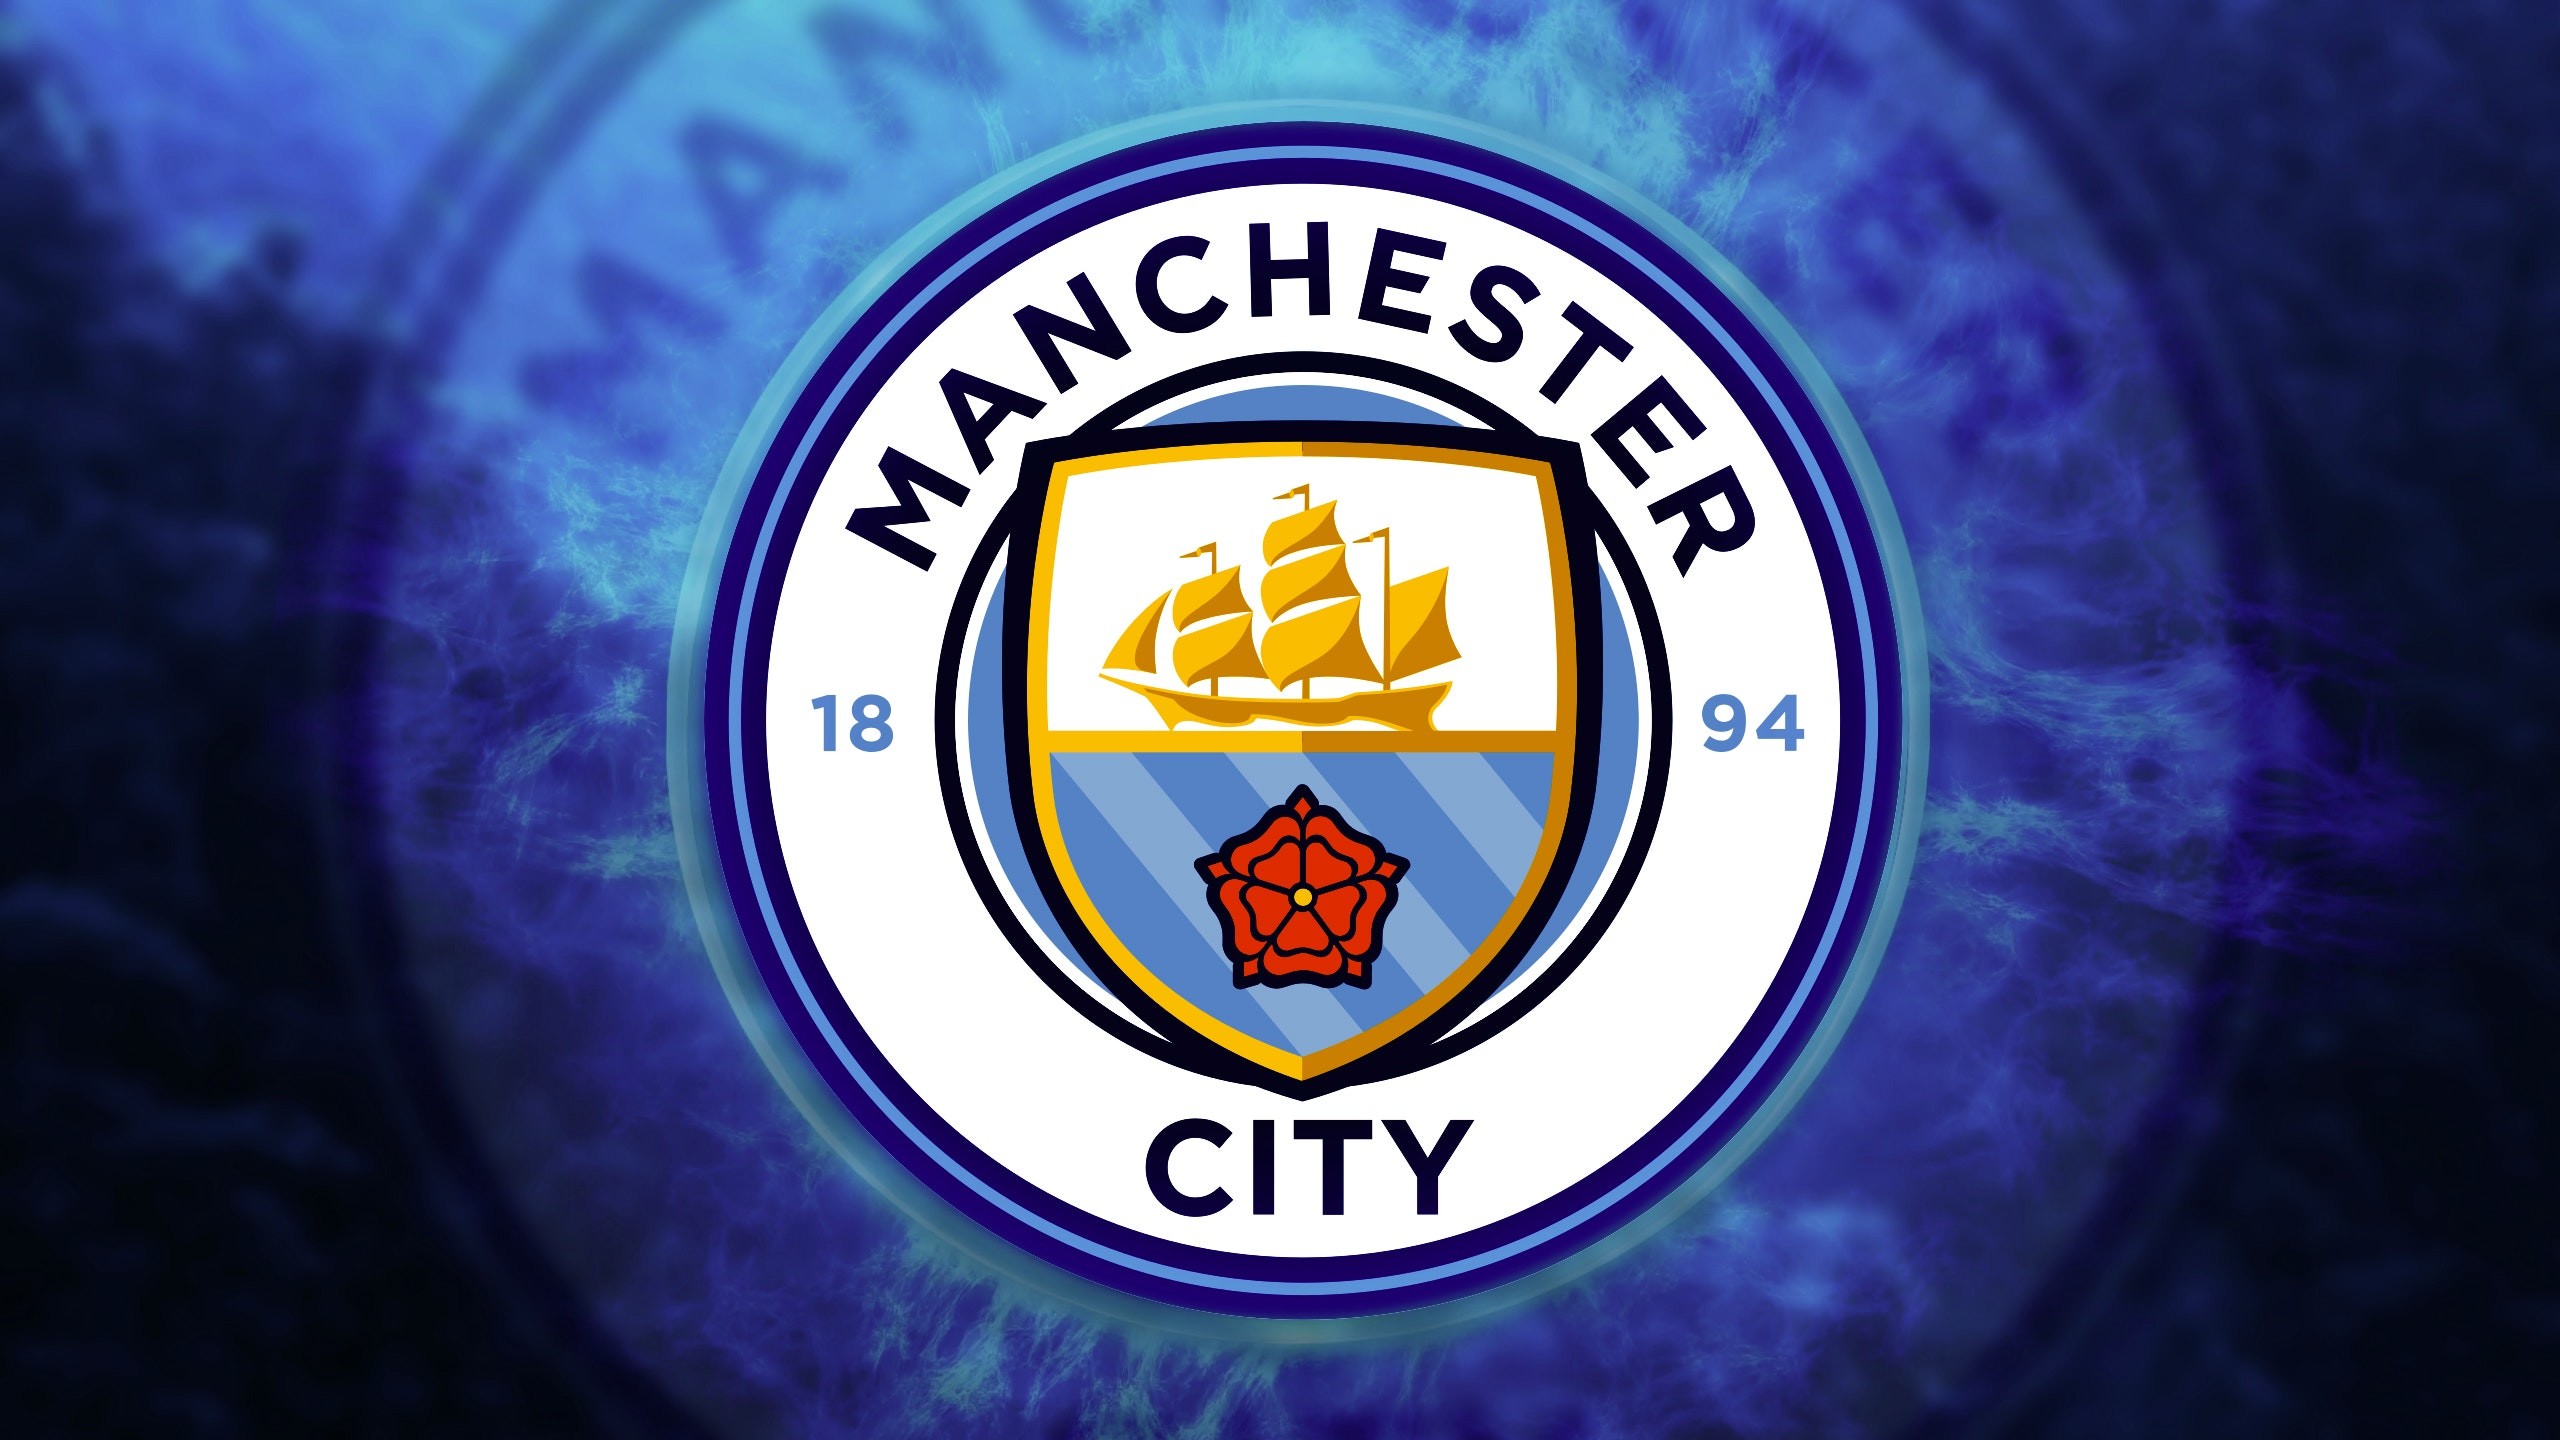 2560x1440 10 Best Man City Wallpaper Iphone FULL HD 1920 1080 For PC Background 2018  free Source Â· Bountie Blog Gaming will never be the same again